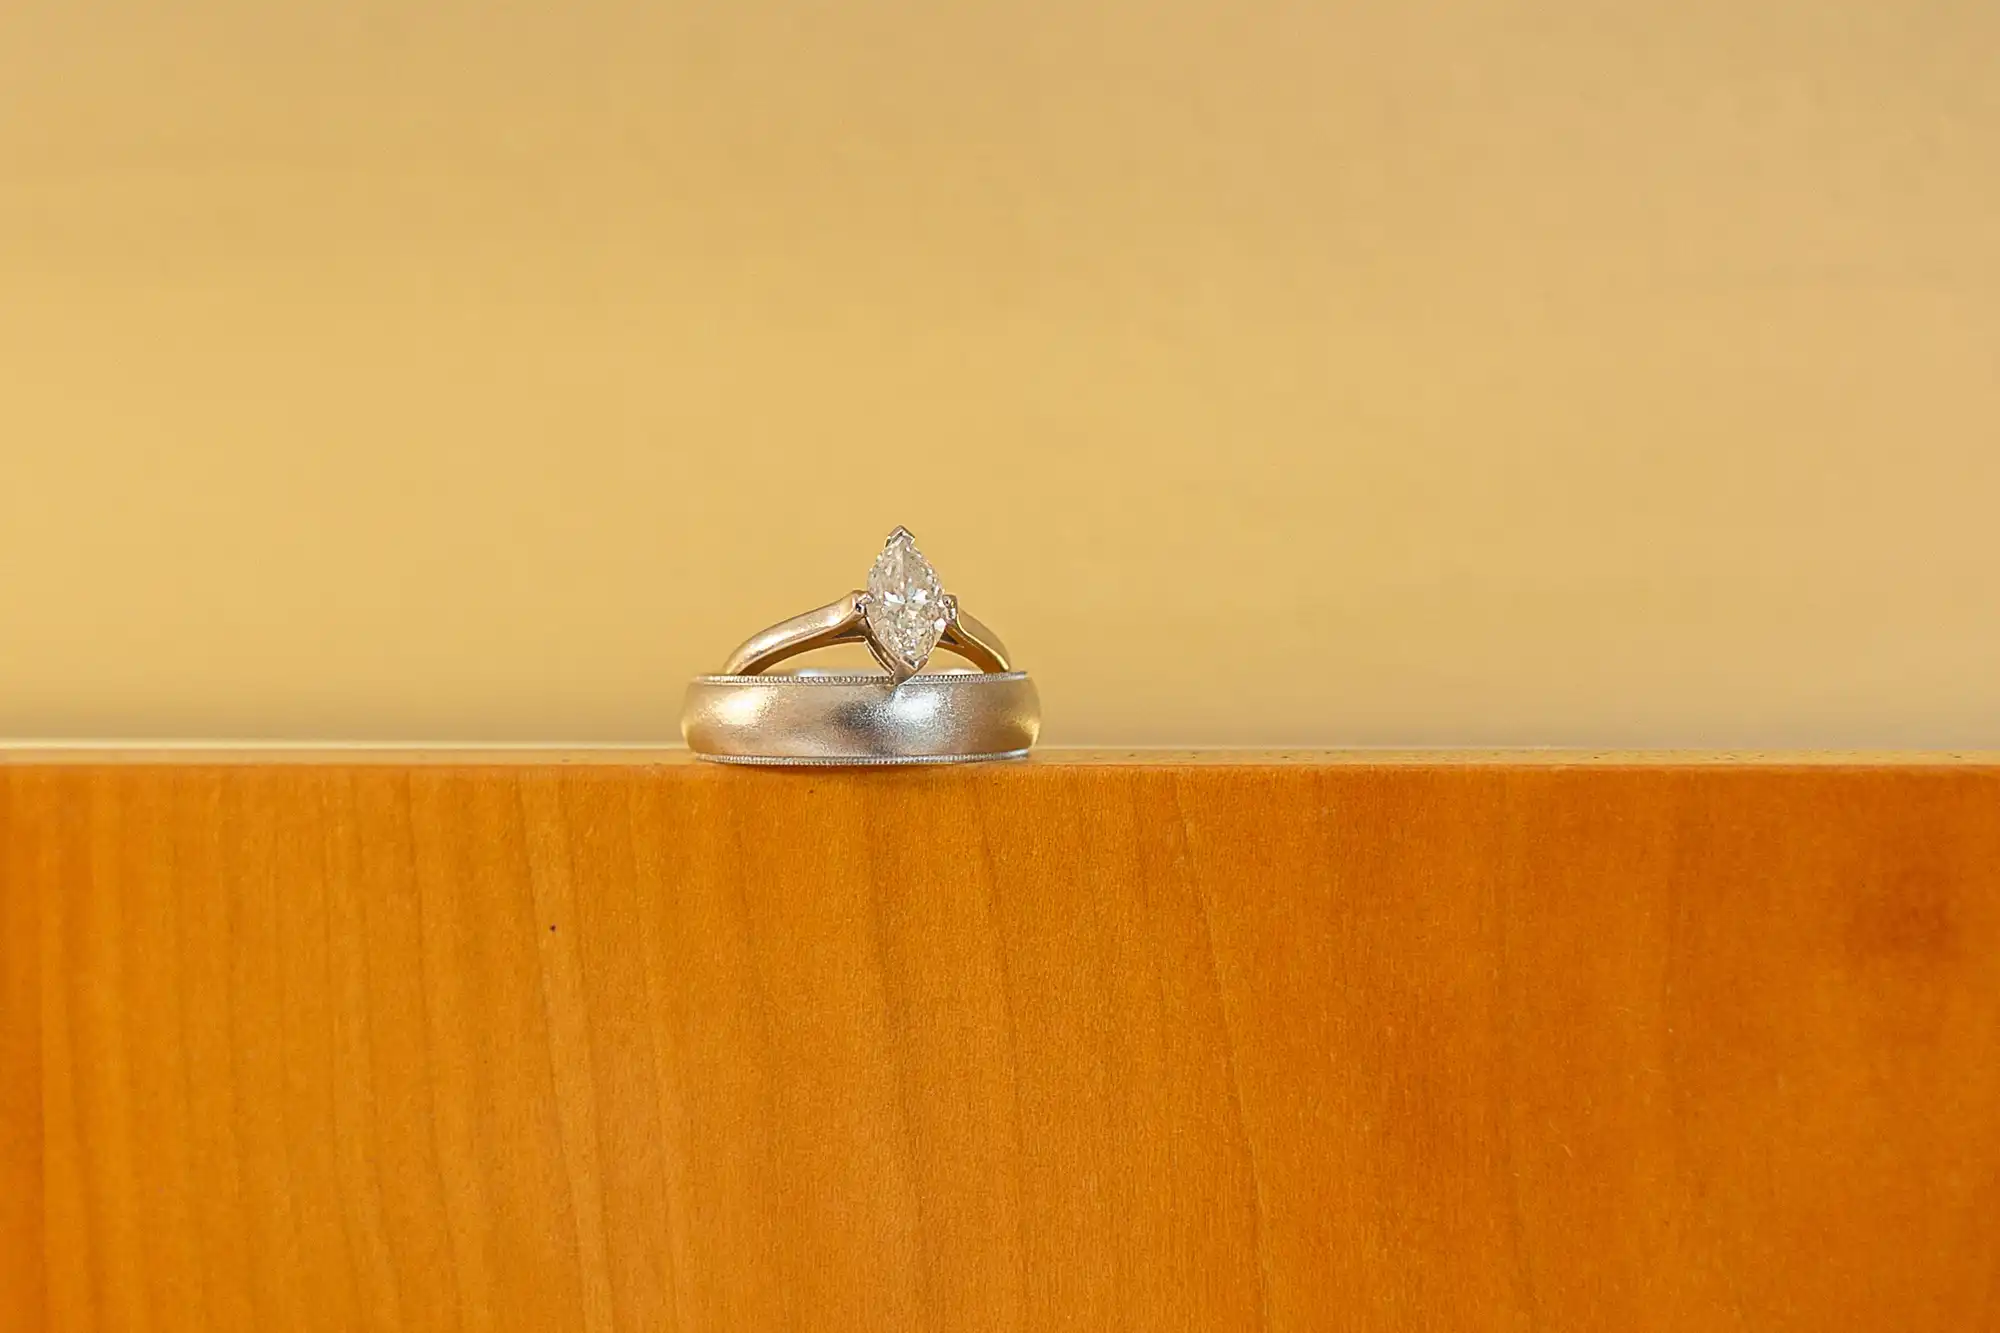 A diamond ring placed on a wooden surface against a soft yellow background.